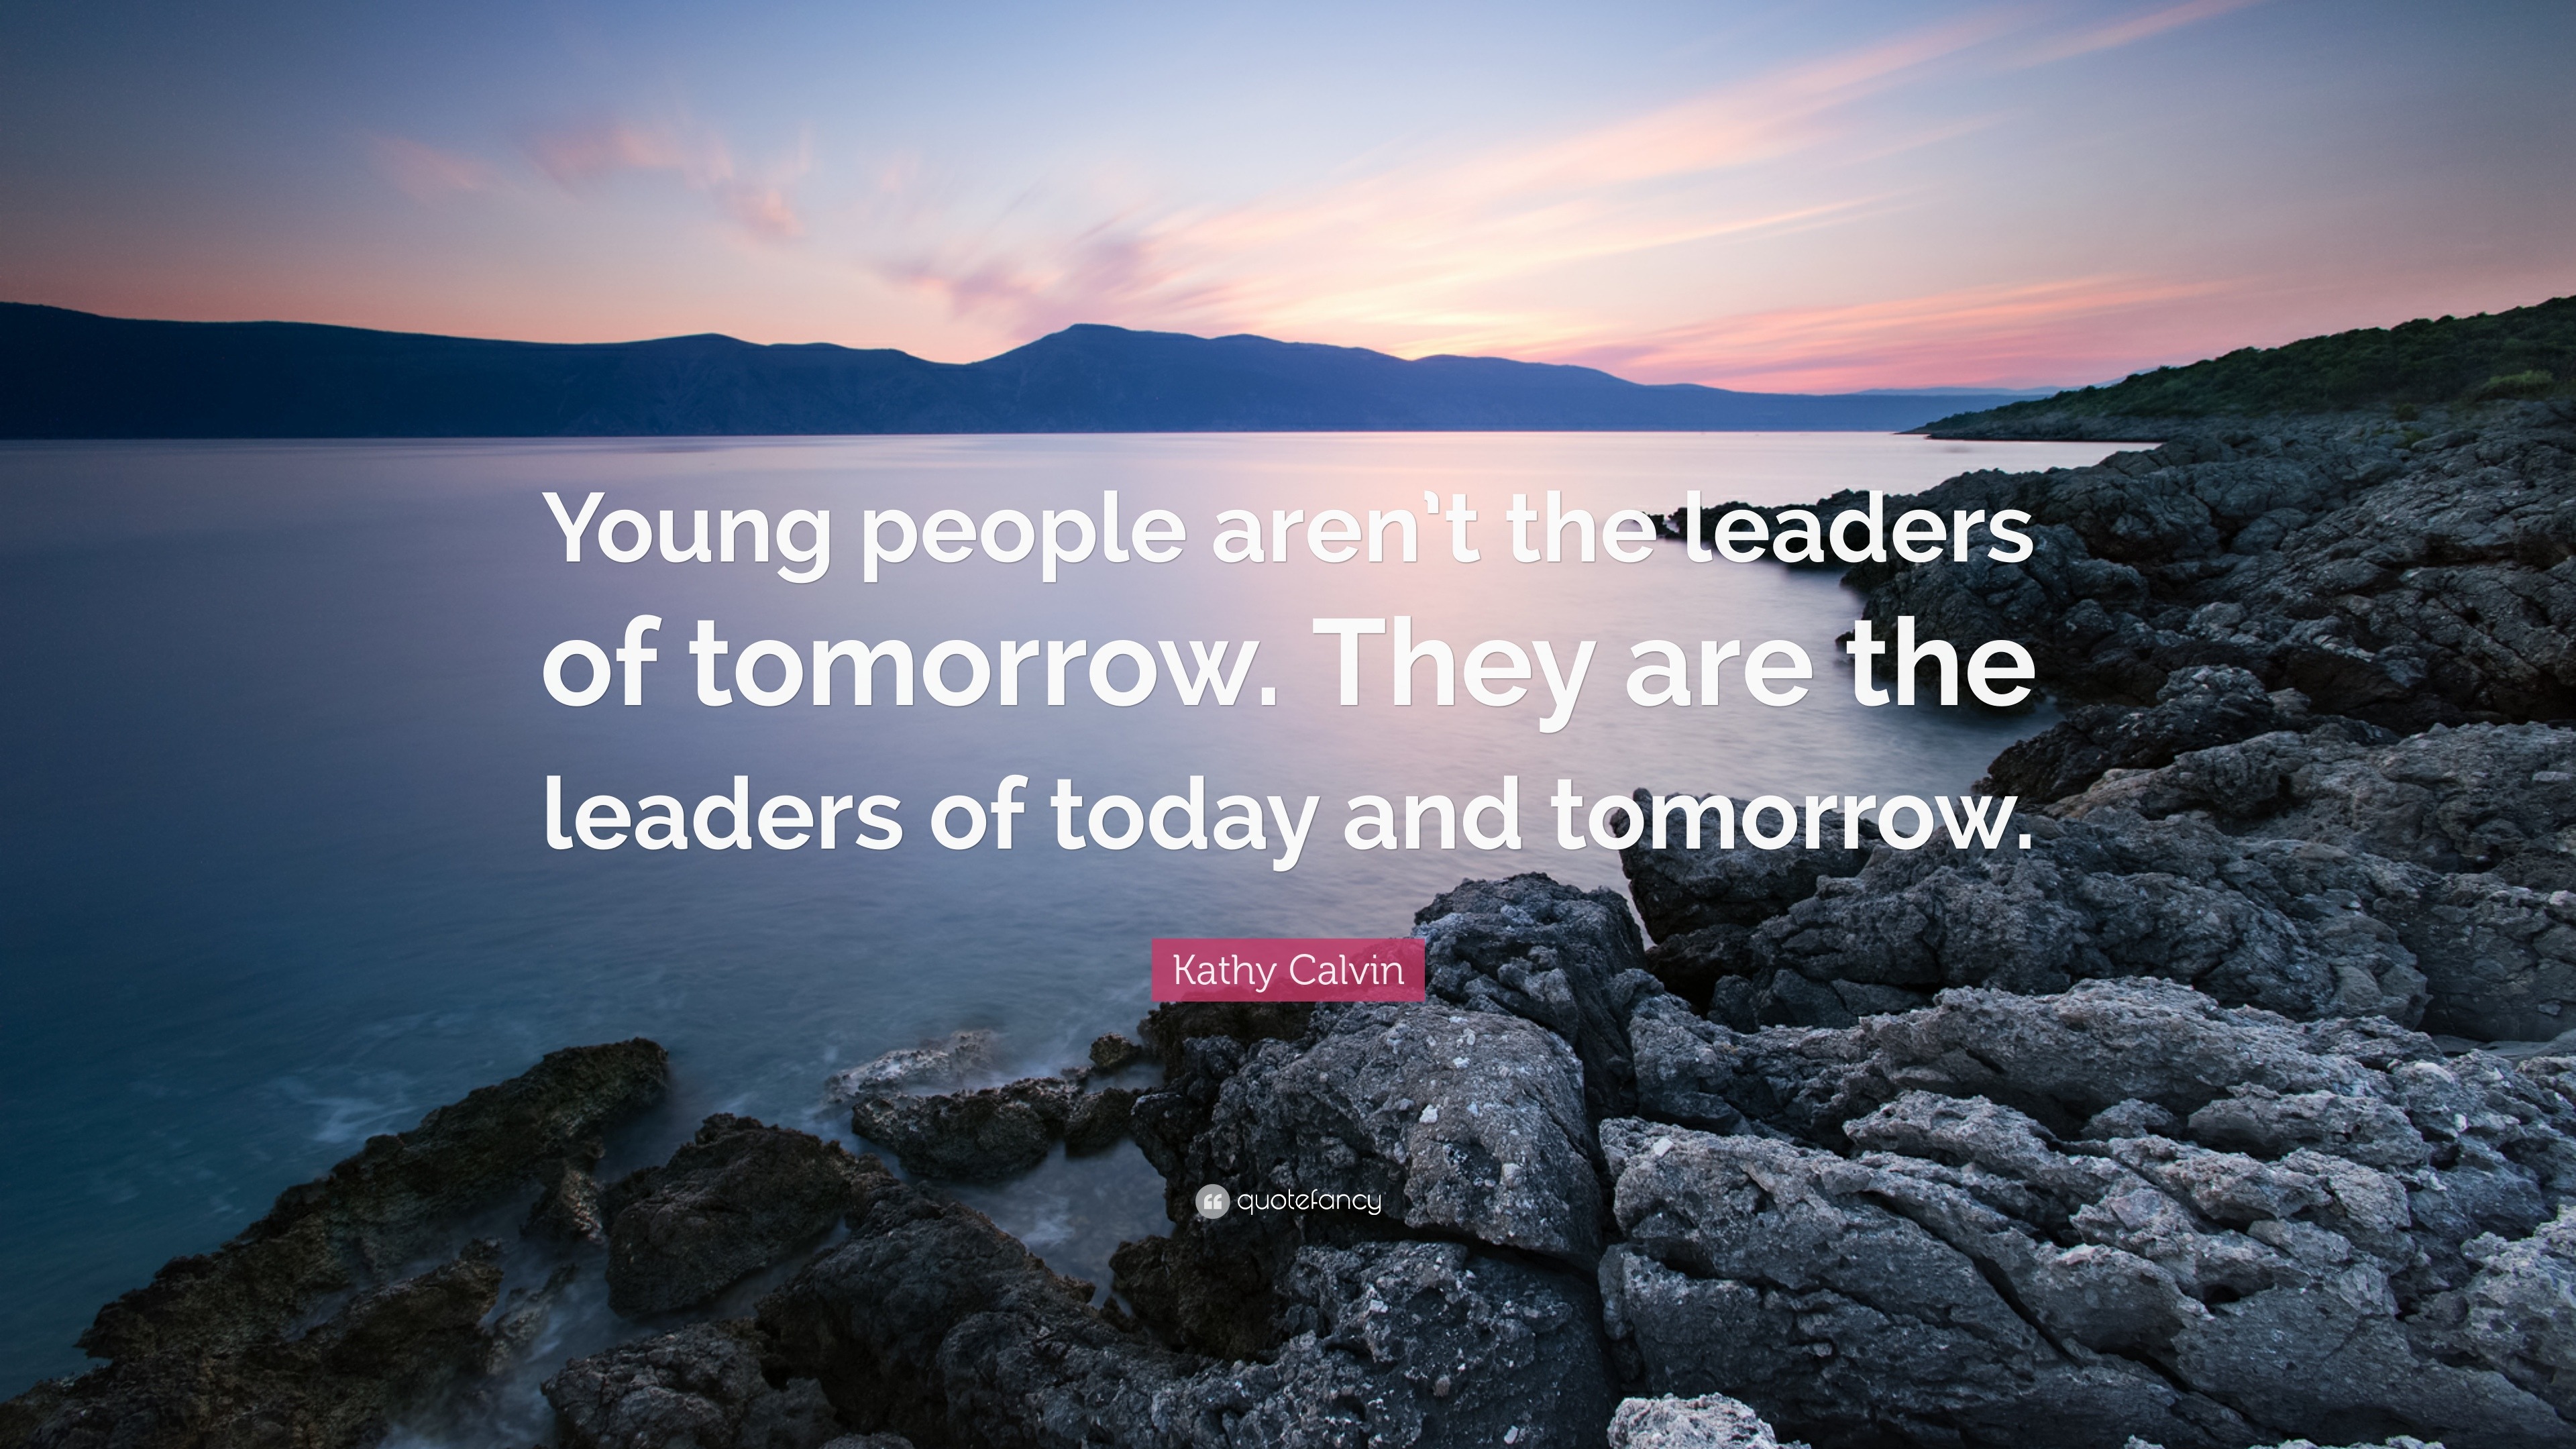 Kathy Calvin Quote: “Young people aren't the leaders of tomorrow. They are  the leaders of